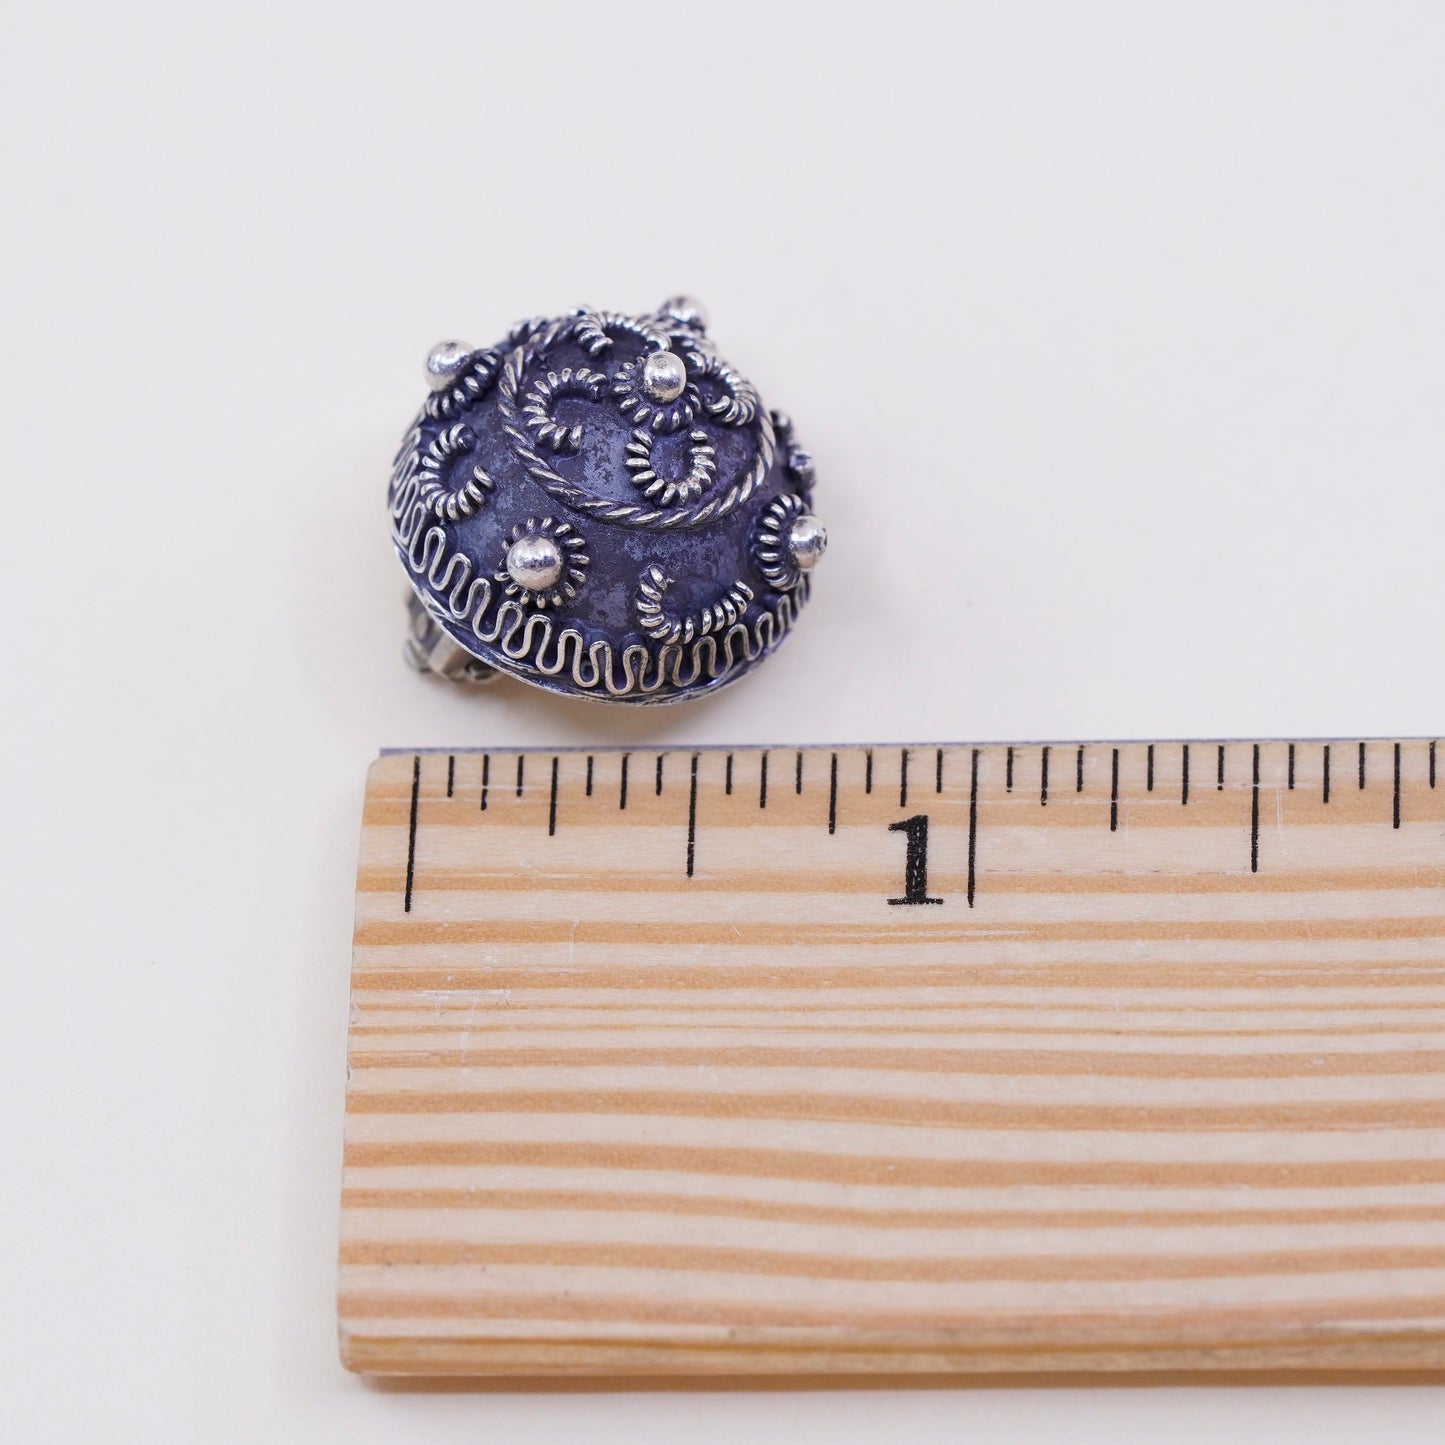 vintage sterling silver handmade earrings, 925 clip on with filigree and beads